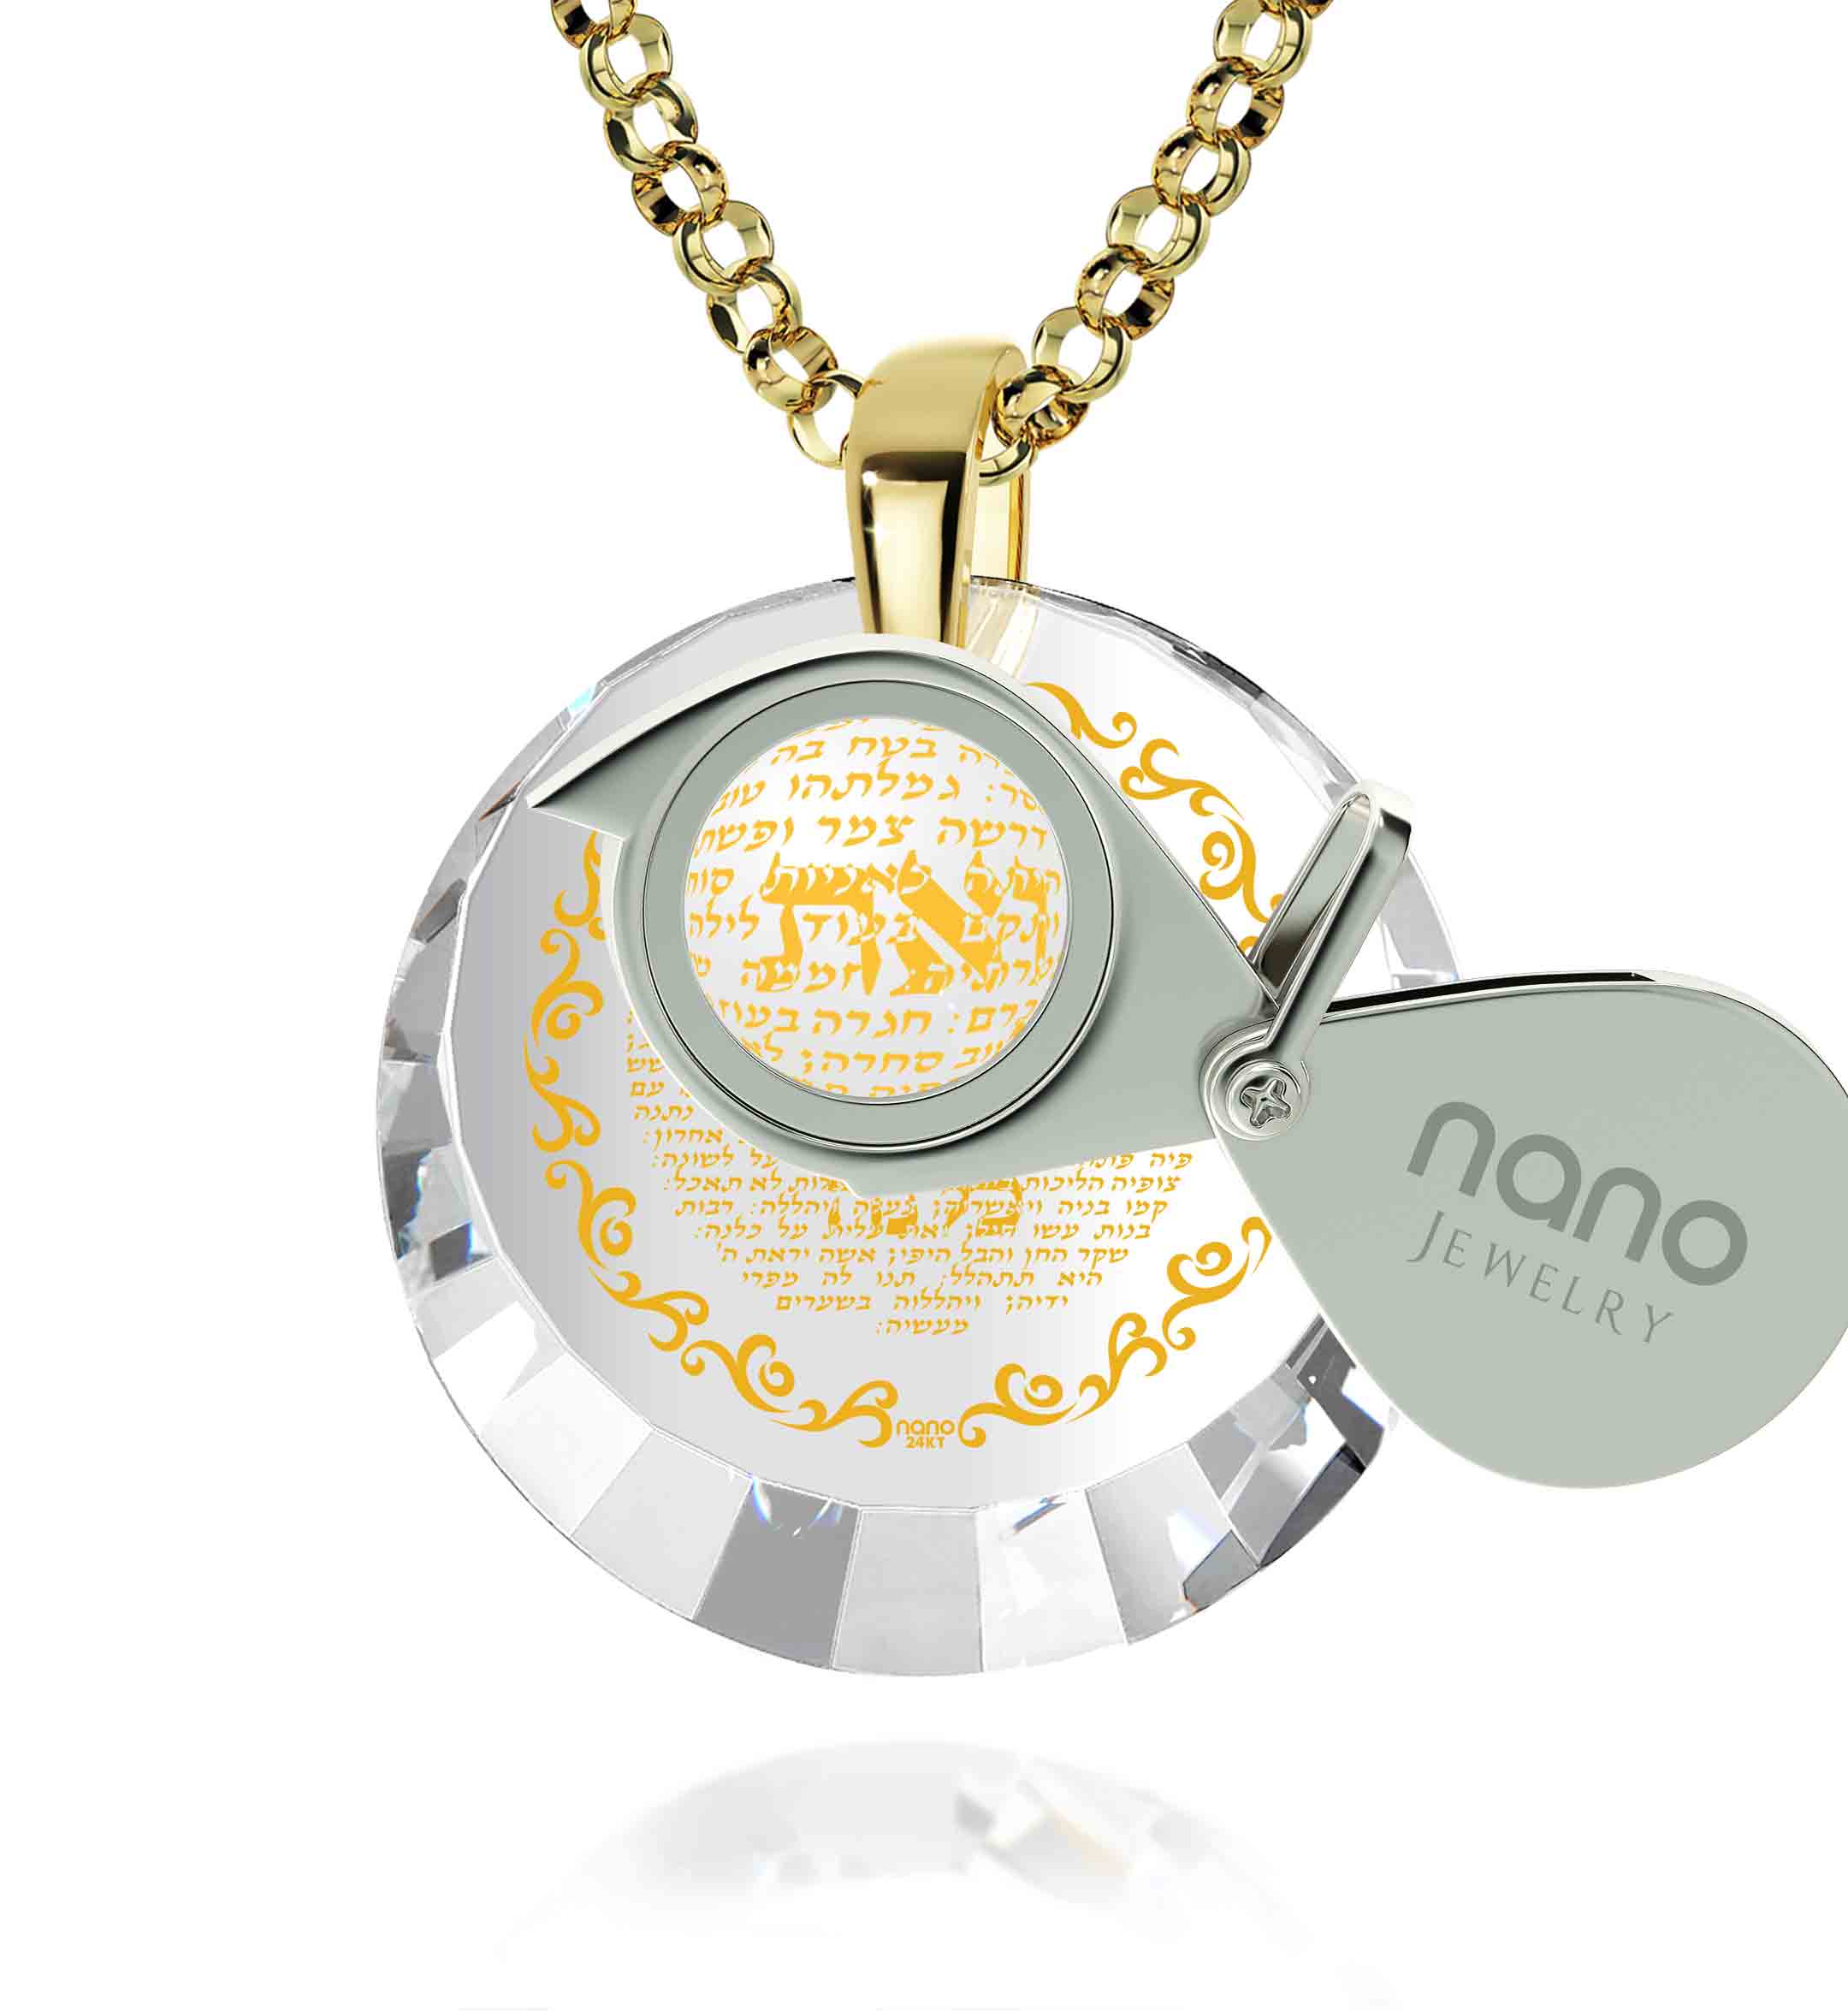 Close-up of a woman wearing a white t-shirt and an Eshet Chayil Hebrew Necklace Jewish Pendant for Women 24k Gold Inscribed, with dimensions of the pendant displayed.